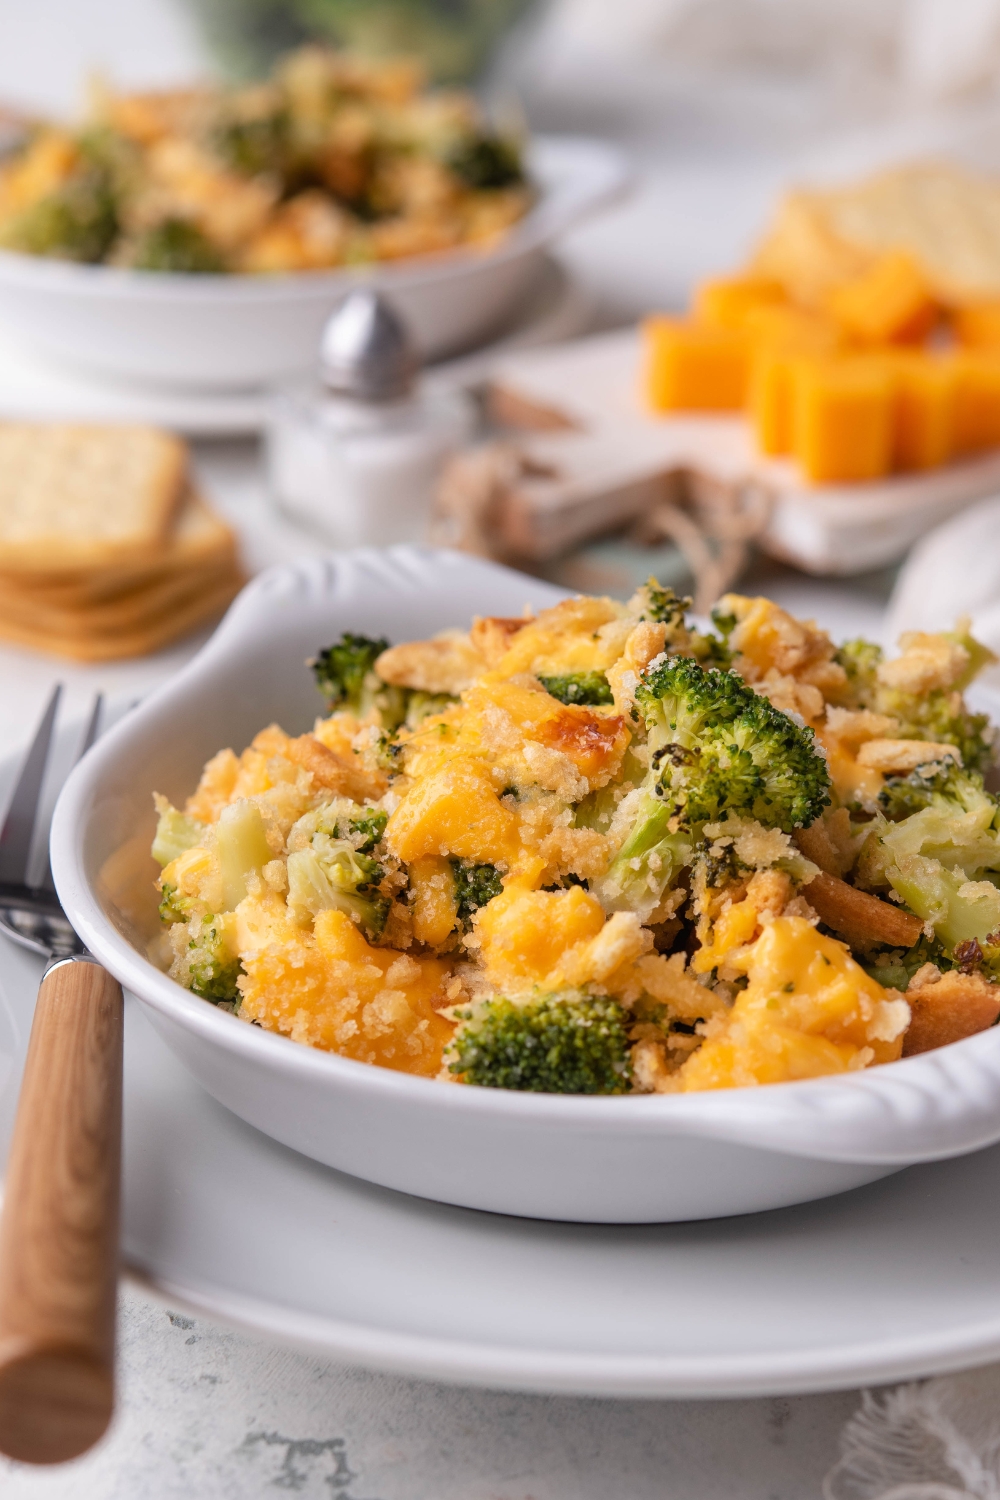 A dish containing cheddars broccoli cheese casserole. A fork sits next to it.